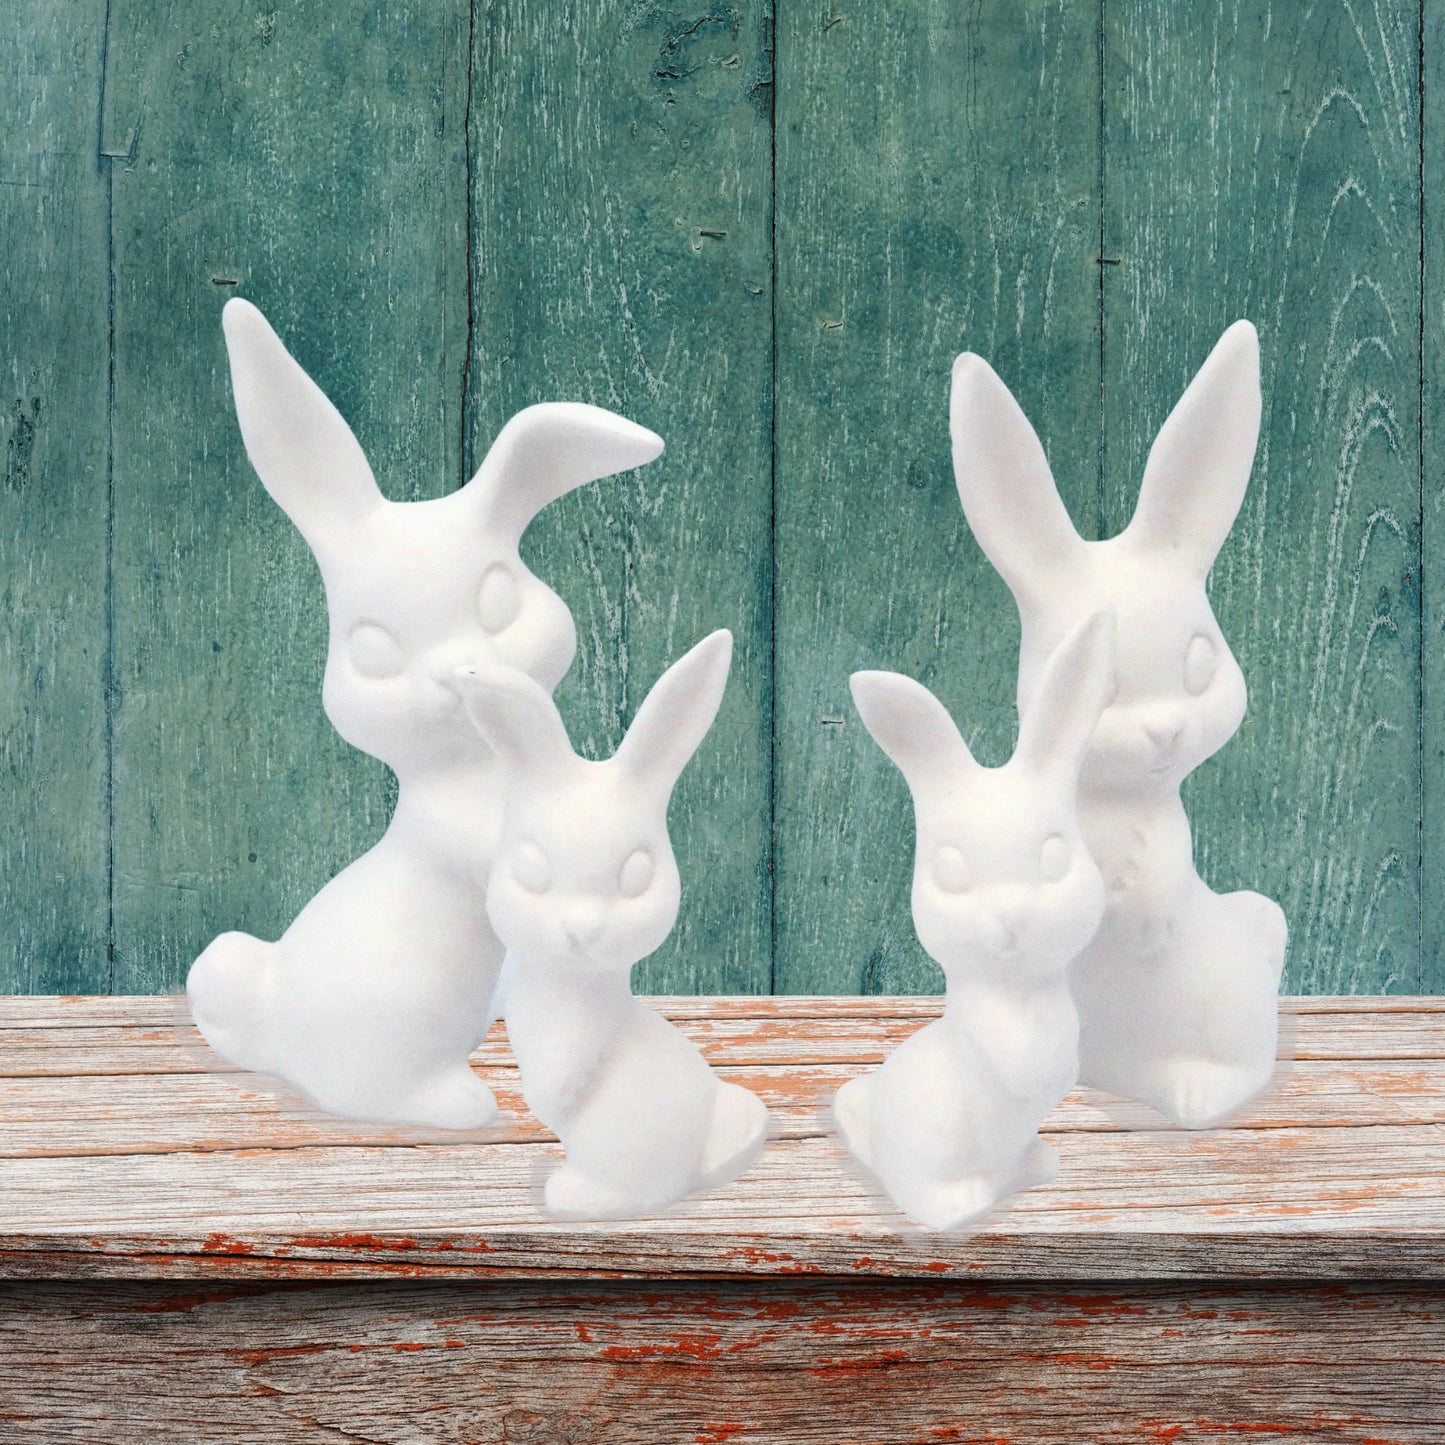 Handmade Set of 4 Ready to Paint Ceramic Bunny Figurines for Bunny Lover Gift